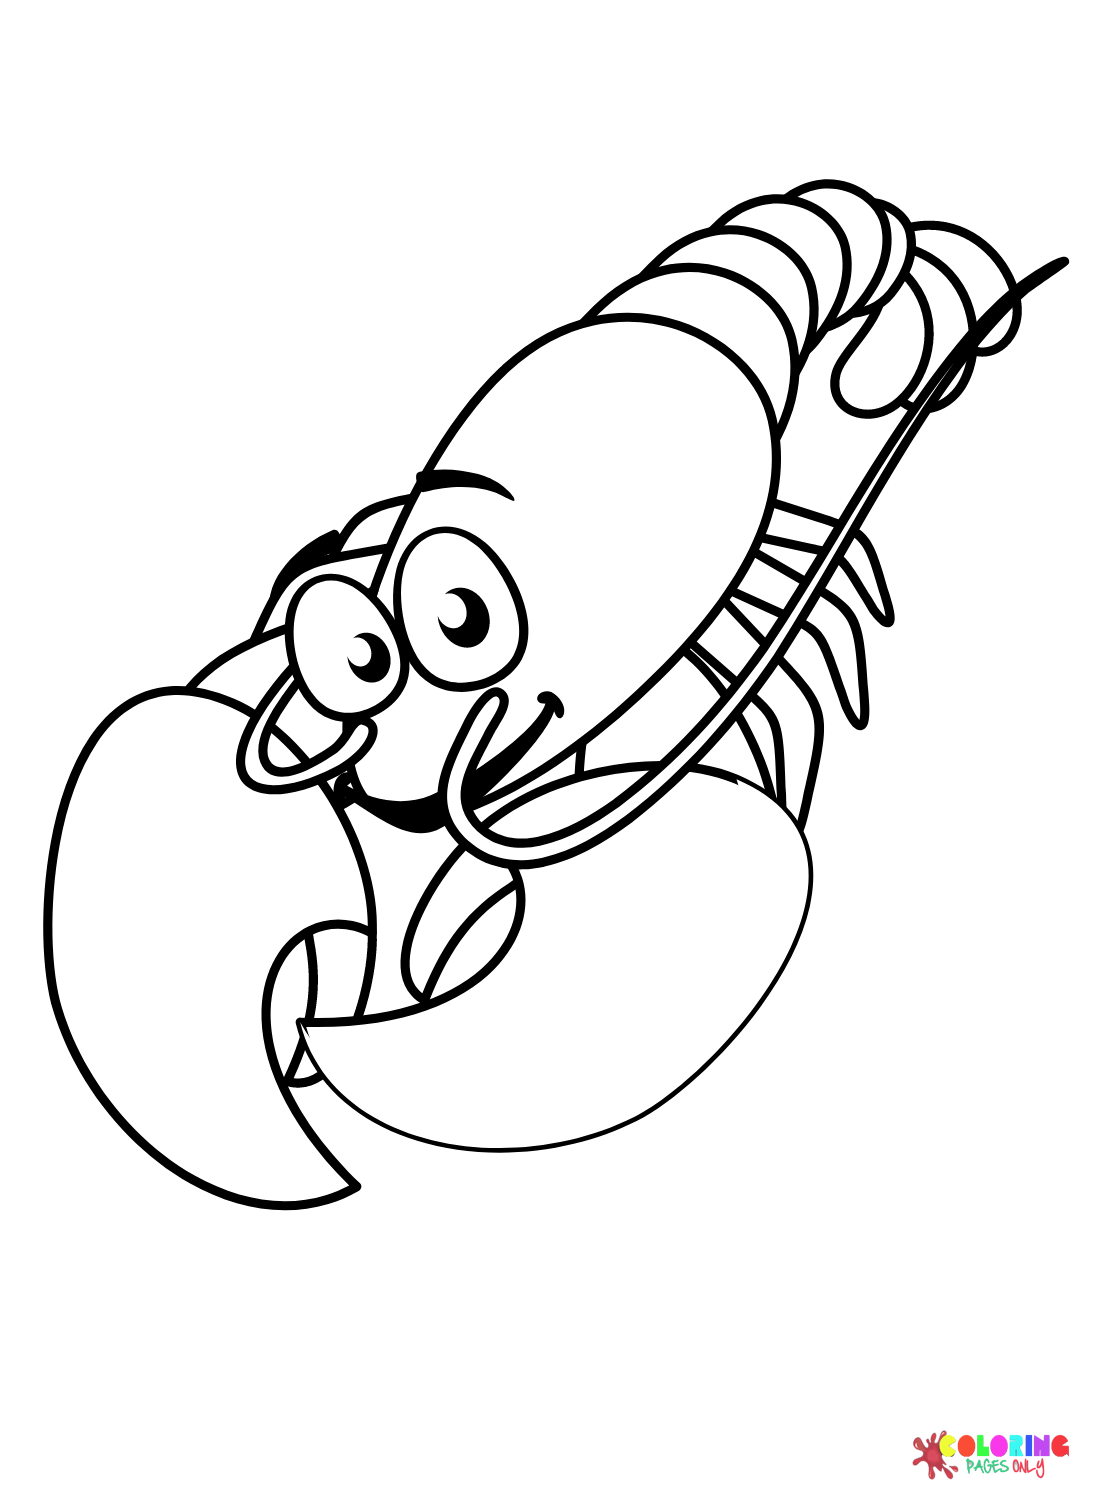 Lobster coloring pages printable for free download